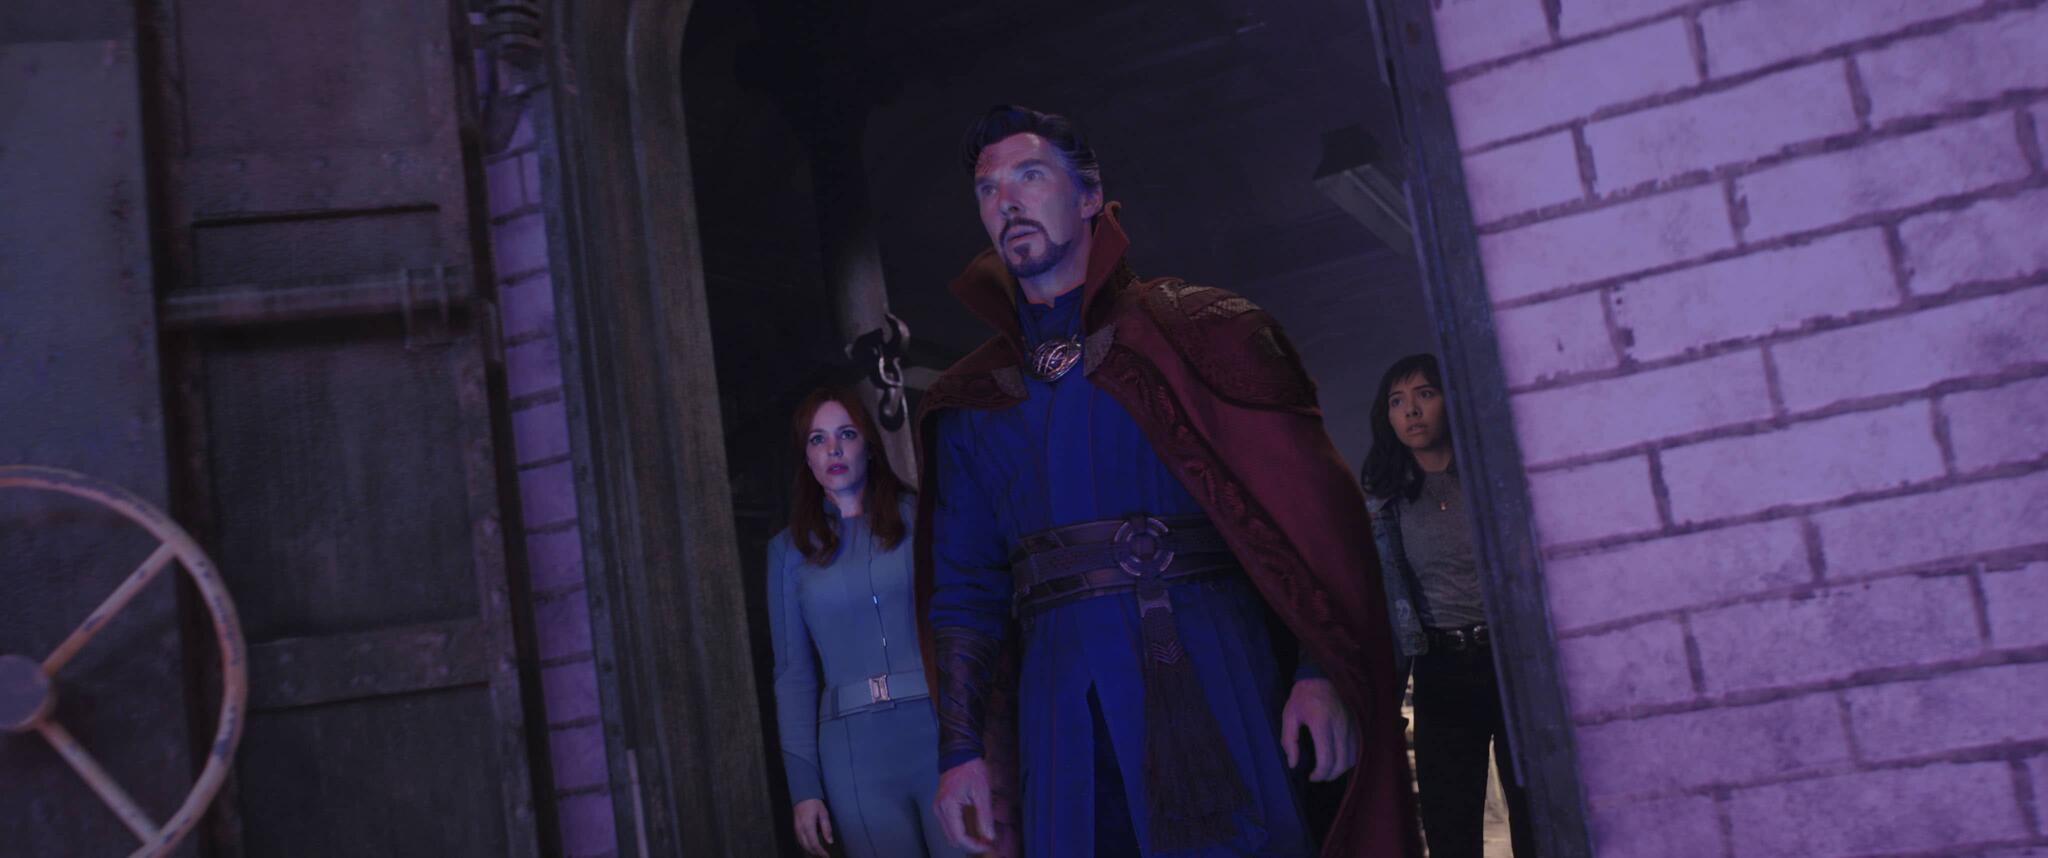 Rachel McAdams as Dr.  Christine Palmer, Benedict Cumberbatch as Dr.  Stephen Strange, and Xochitl Gomez as America Chavez in Doctor Strange in the Multiverse of Madness